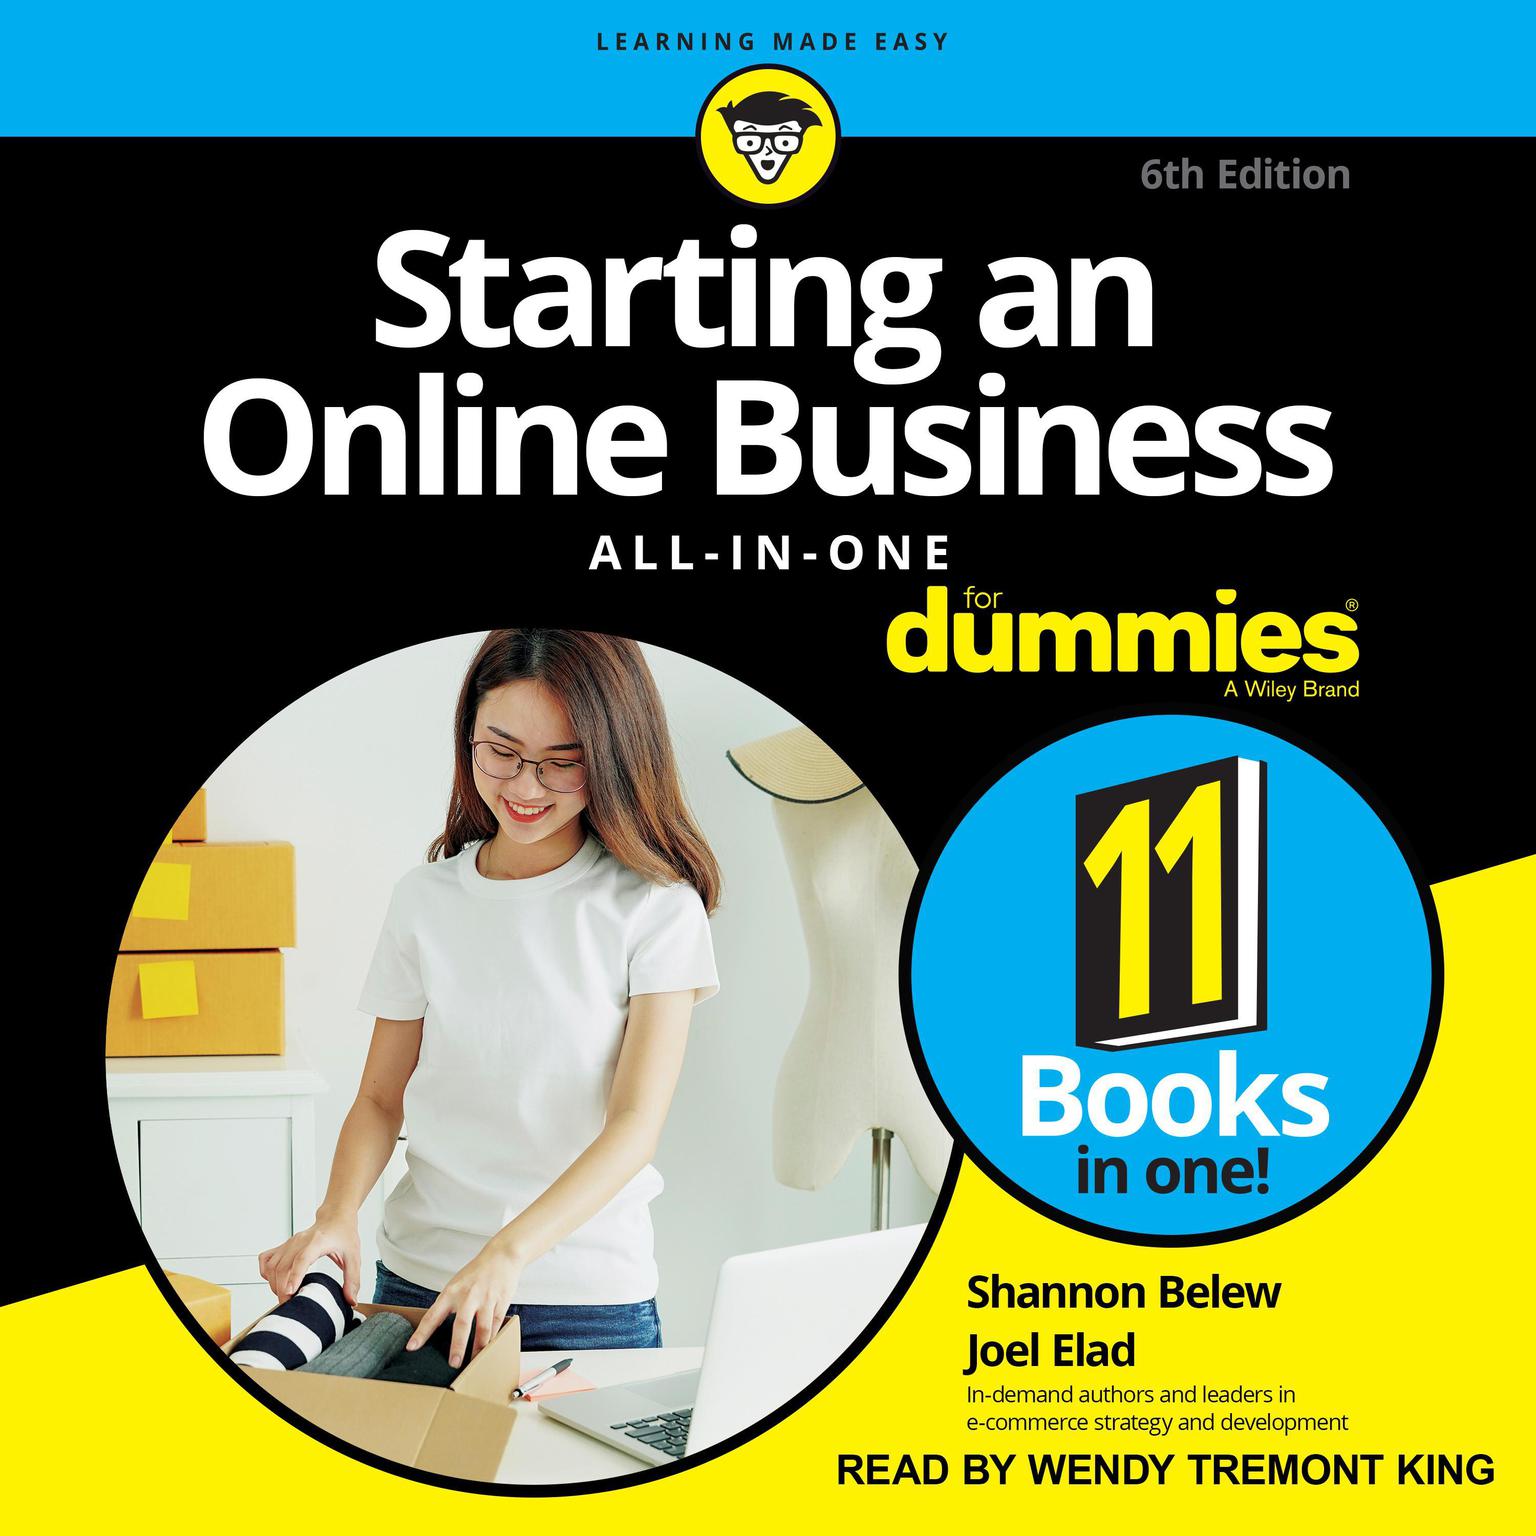 Starting an Online Business All-in-One For Dummies: 6th Edition Audiobook, by Shannon Belew